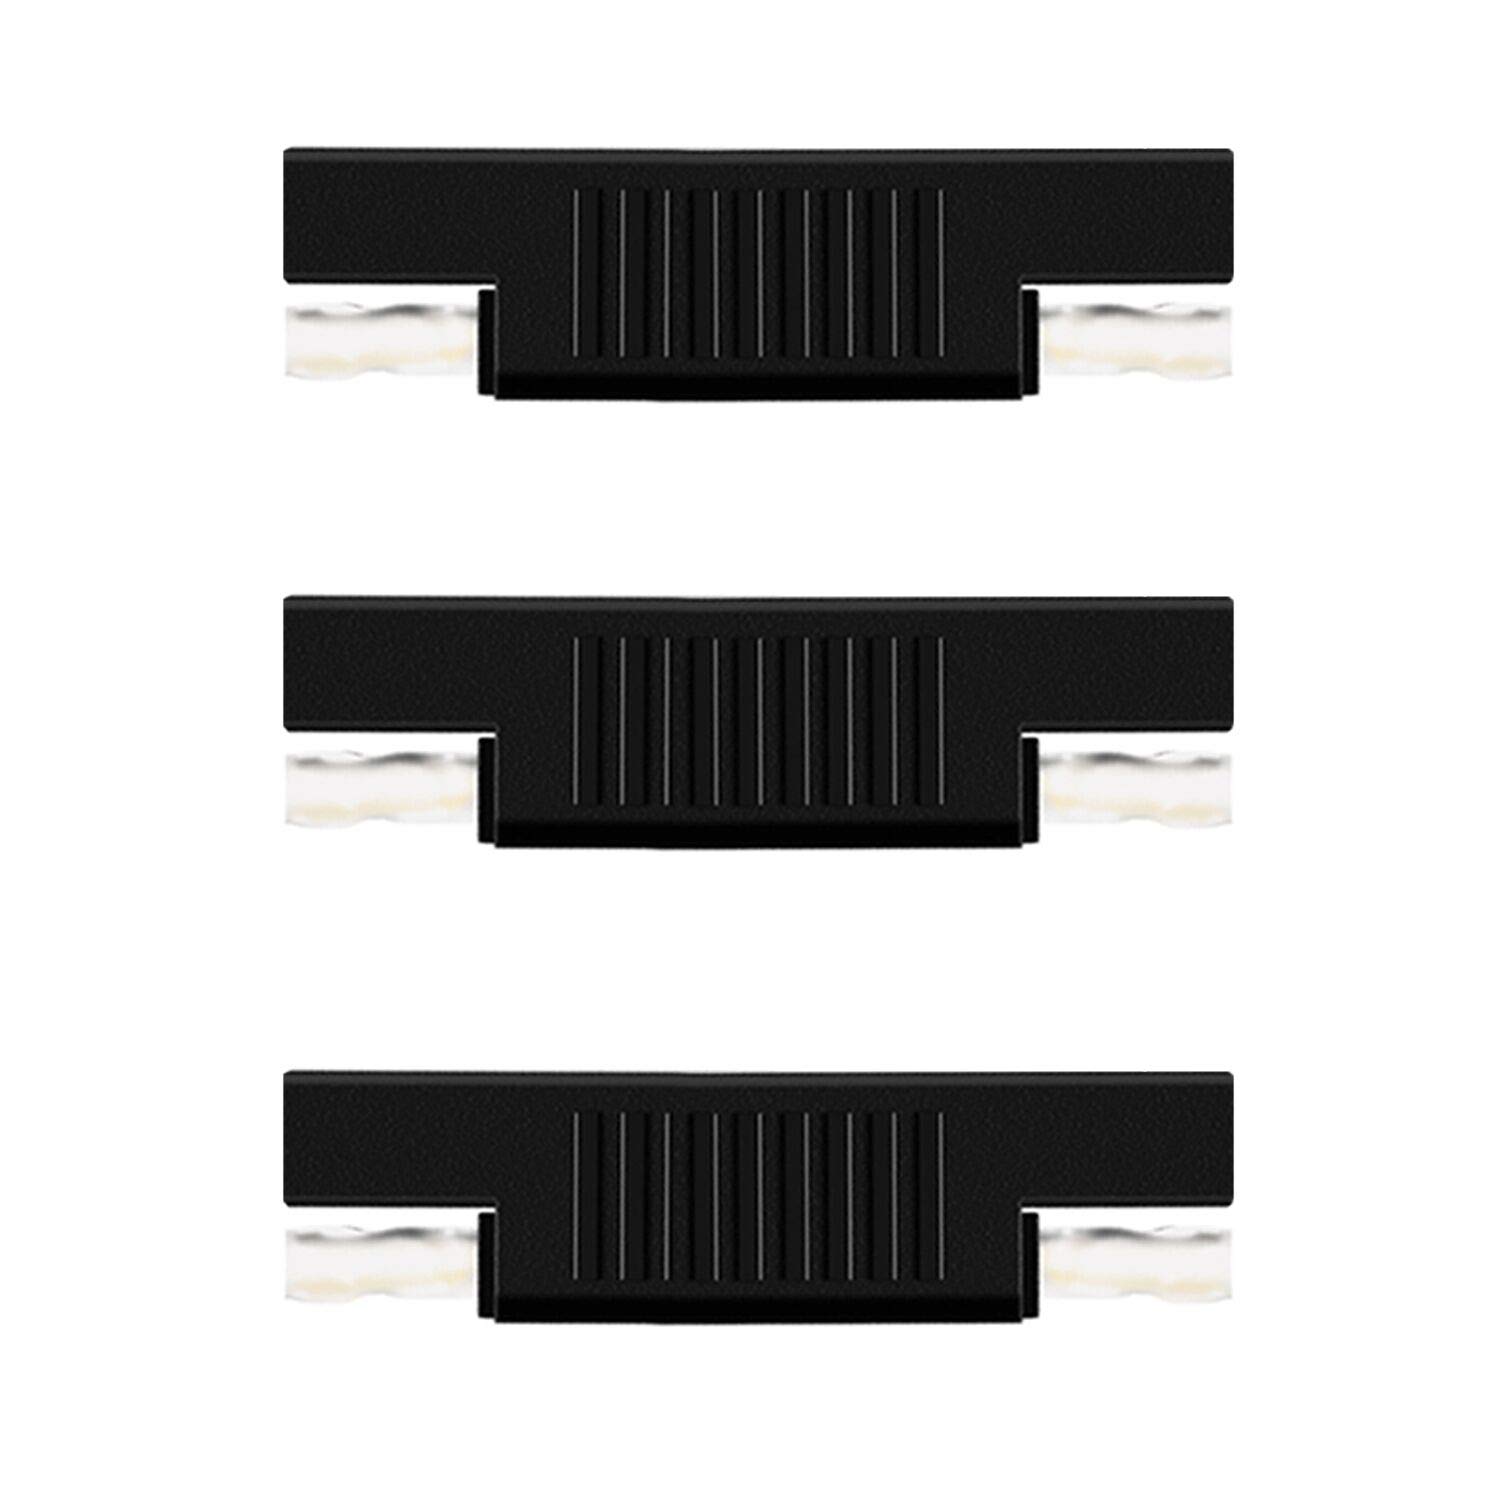 Apoi SAE to SAE Connector [3 Pack] SAE Polarity Reverse Plug Adapter Swaps M-M for Quick Disconnect Wire Harness (Black)